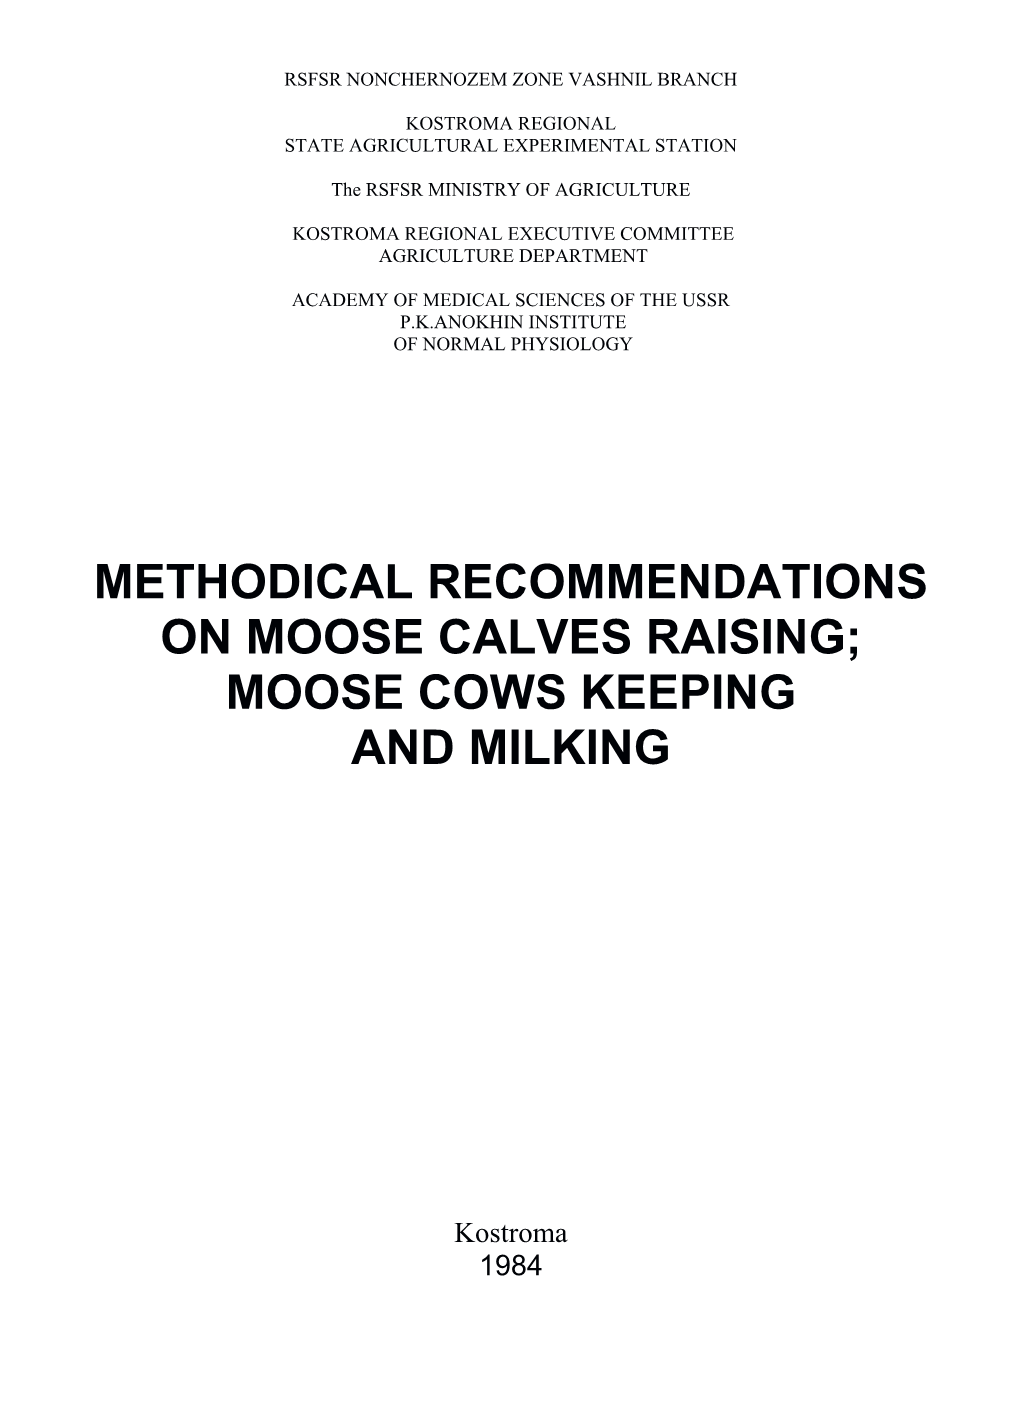 Methodical Recommendations on Moose Calves Raising; Moose Cows Keeping and Milking